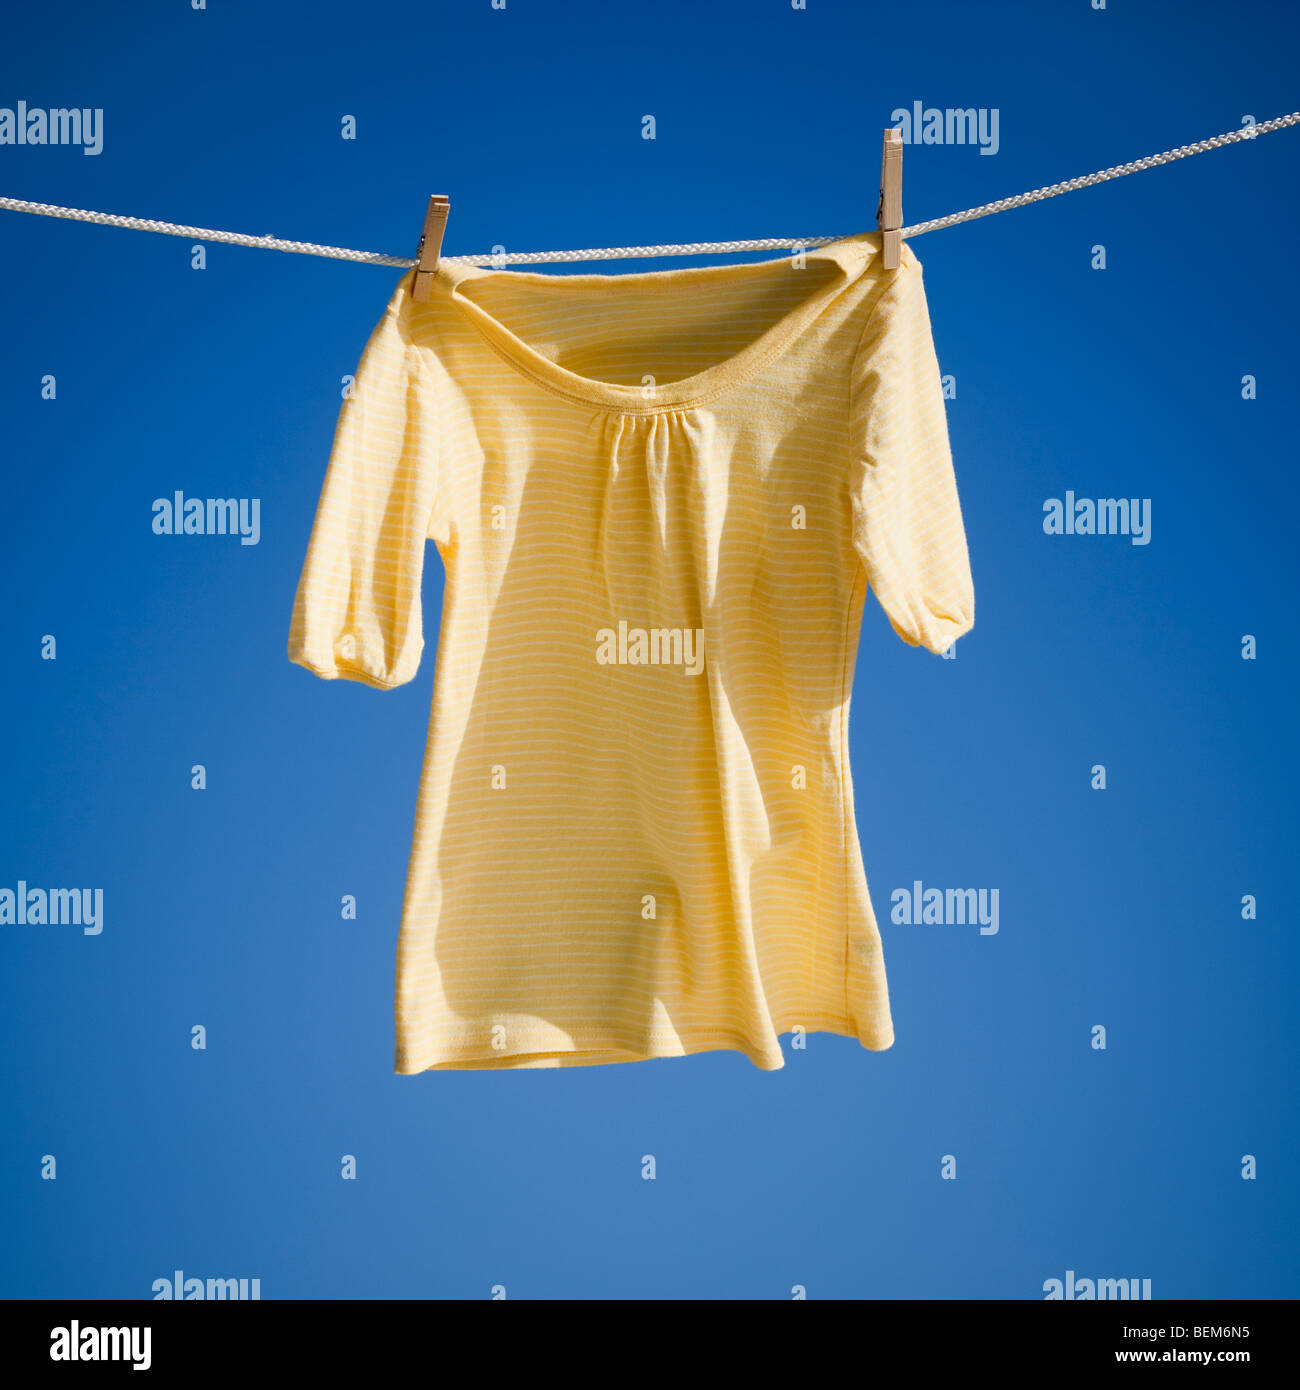 Blouse on clothes line Stock Photo - Alamy